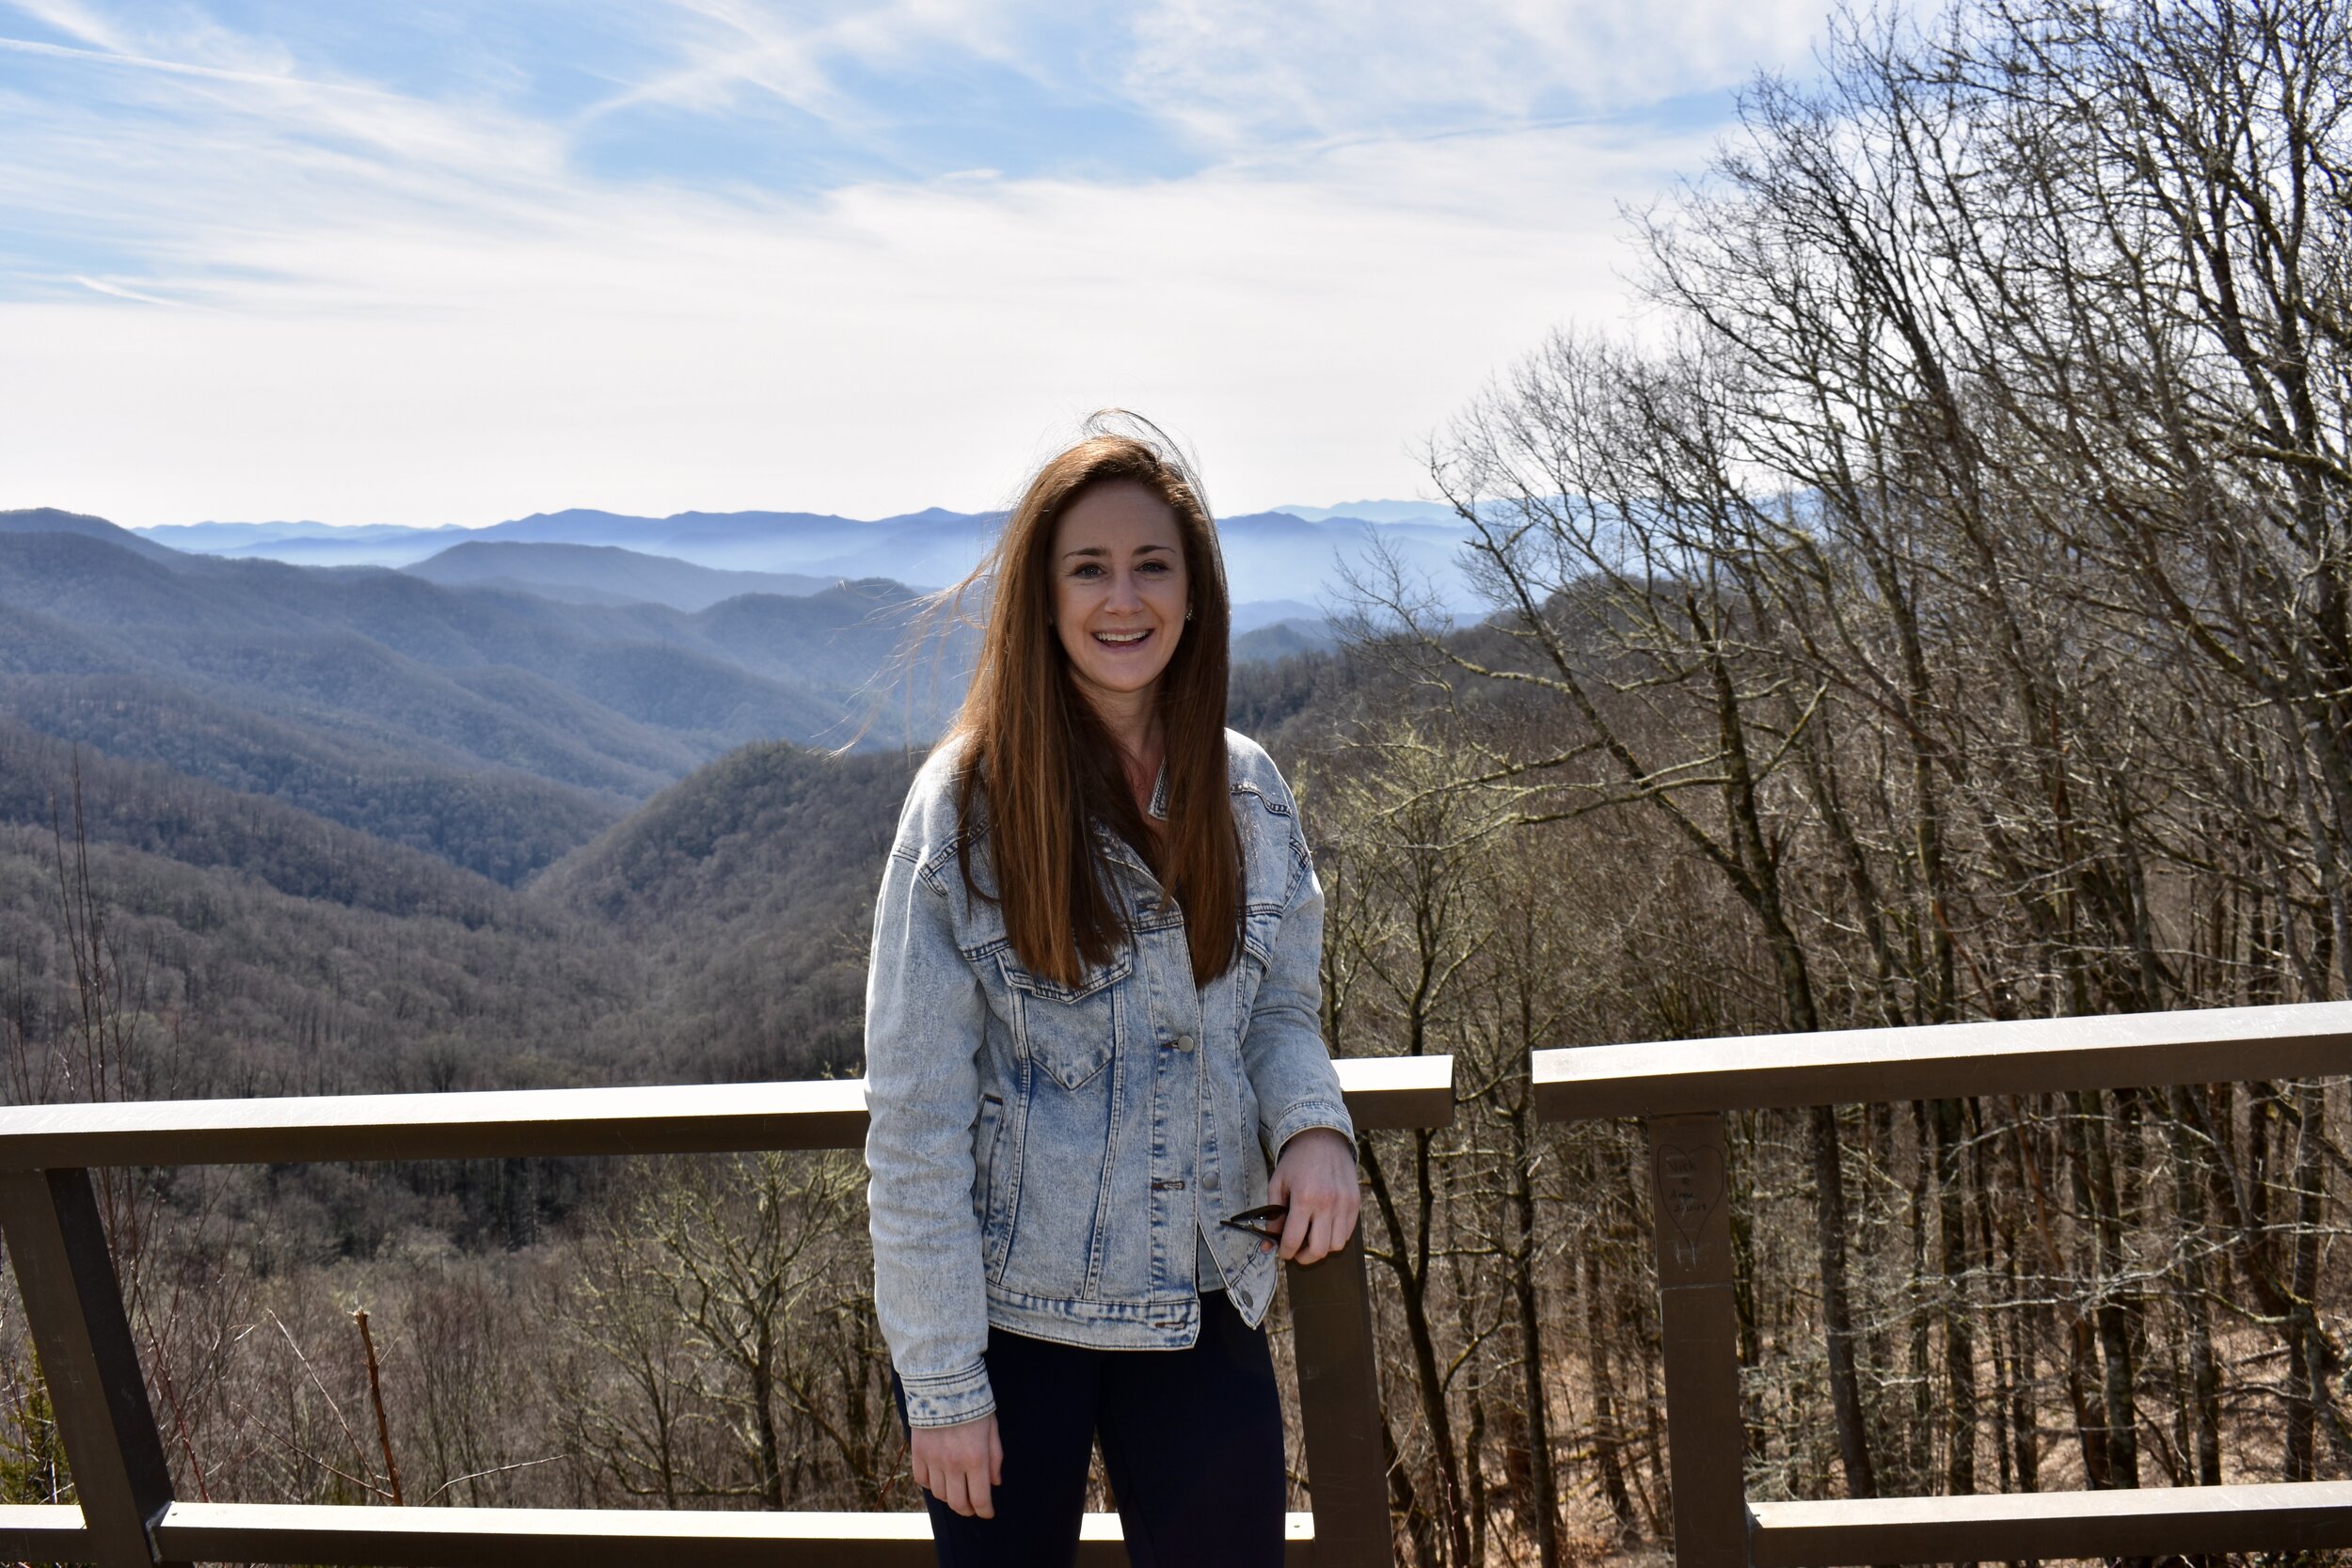 Michelle Wax at the Great Smoky Mountains in Tennessee